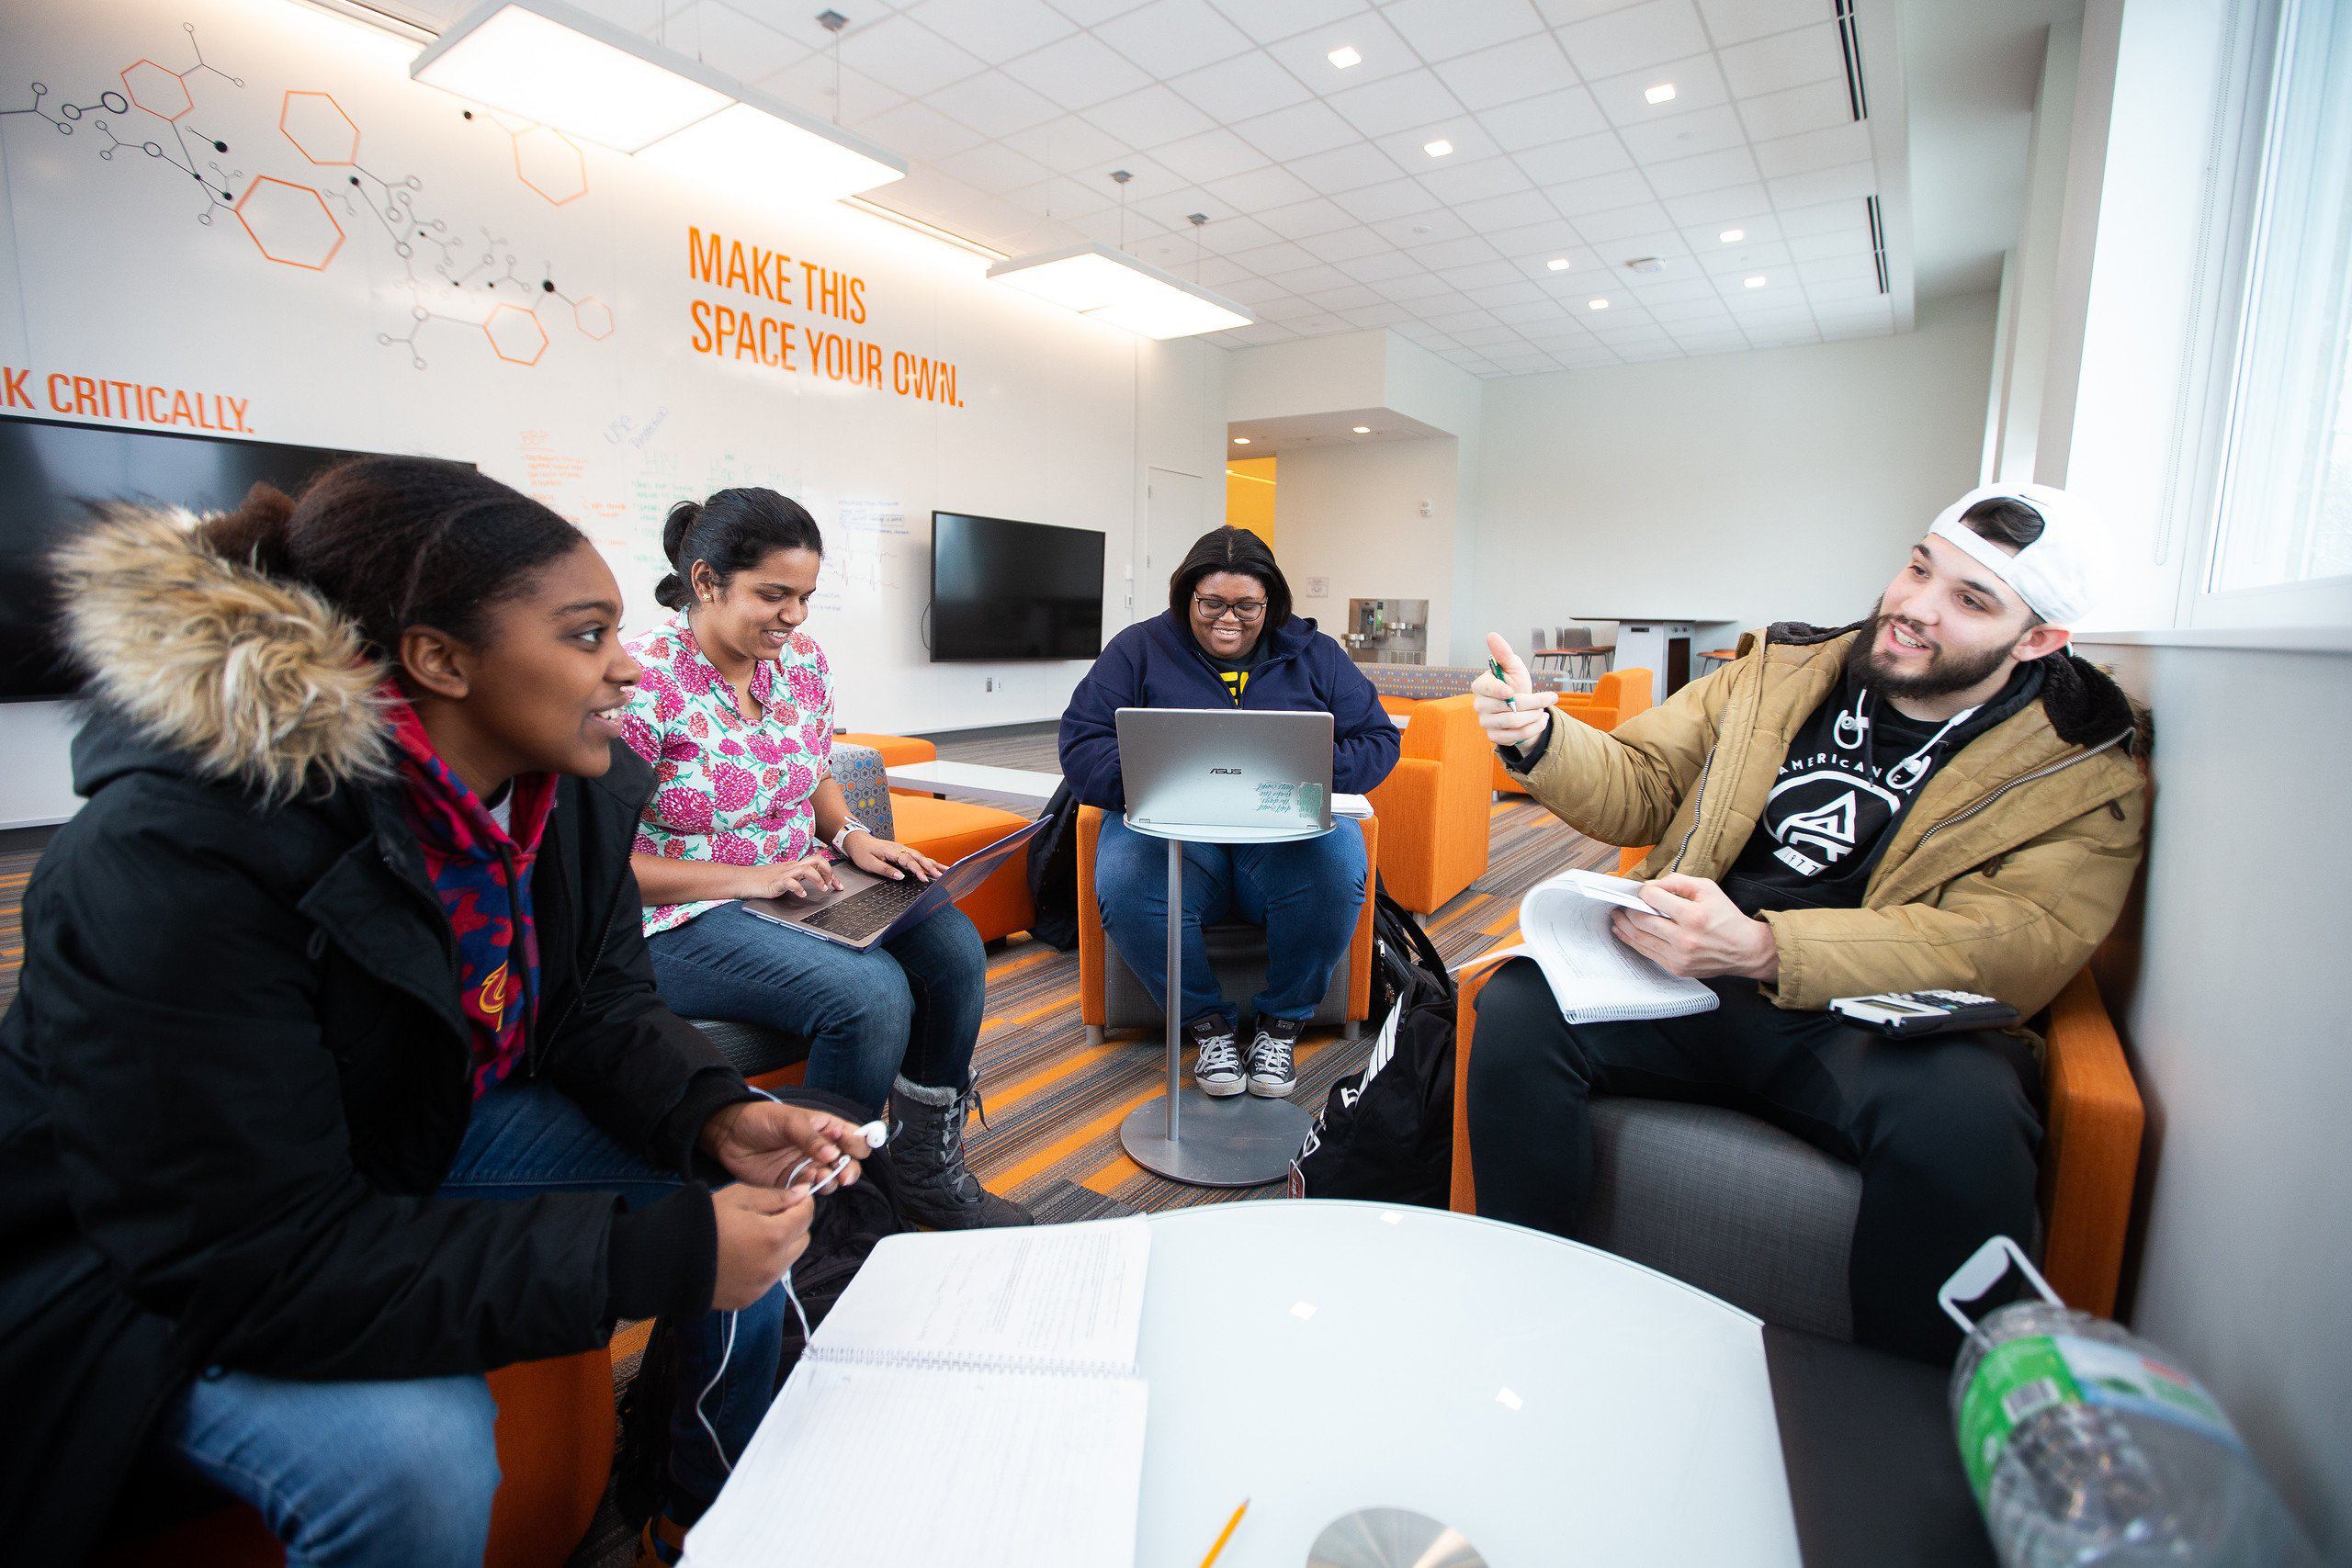 BGSU ethnic studies students discuss complex, charged issues within a rational framework of critical inquiry and a global point of view.